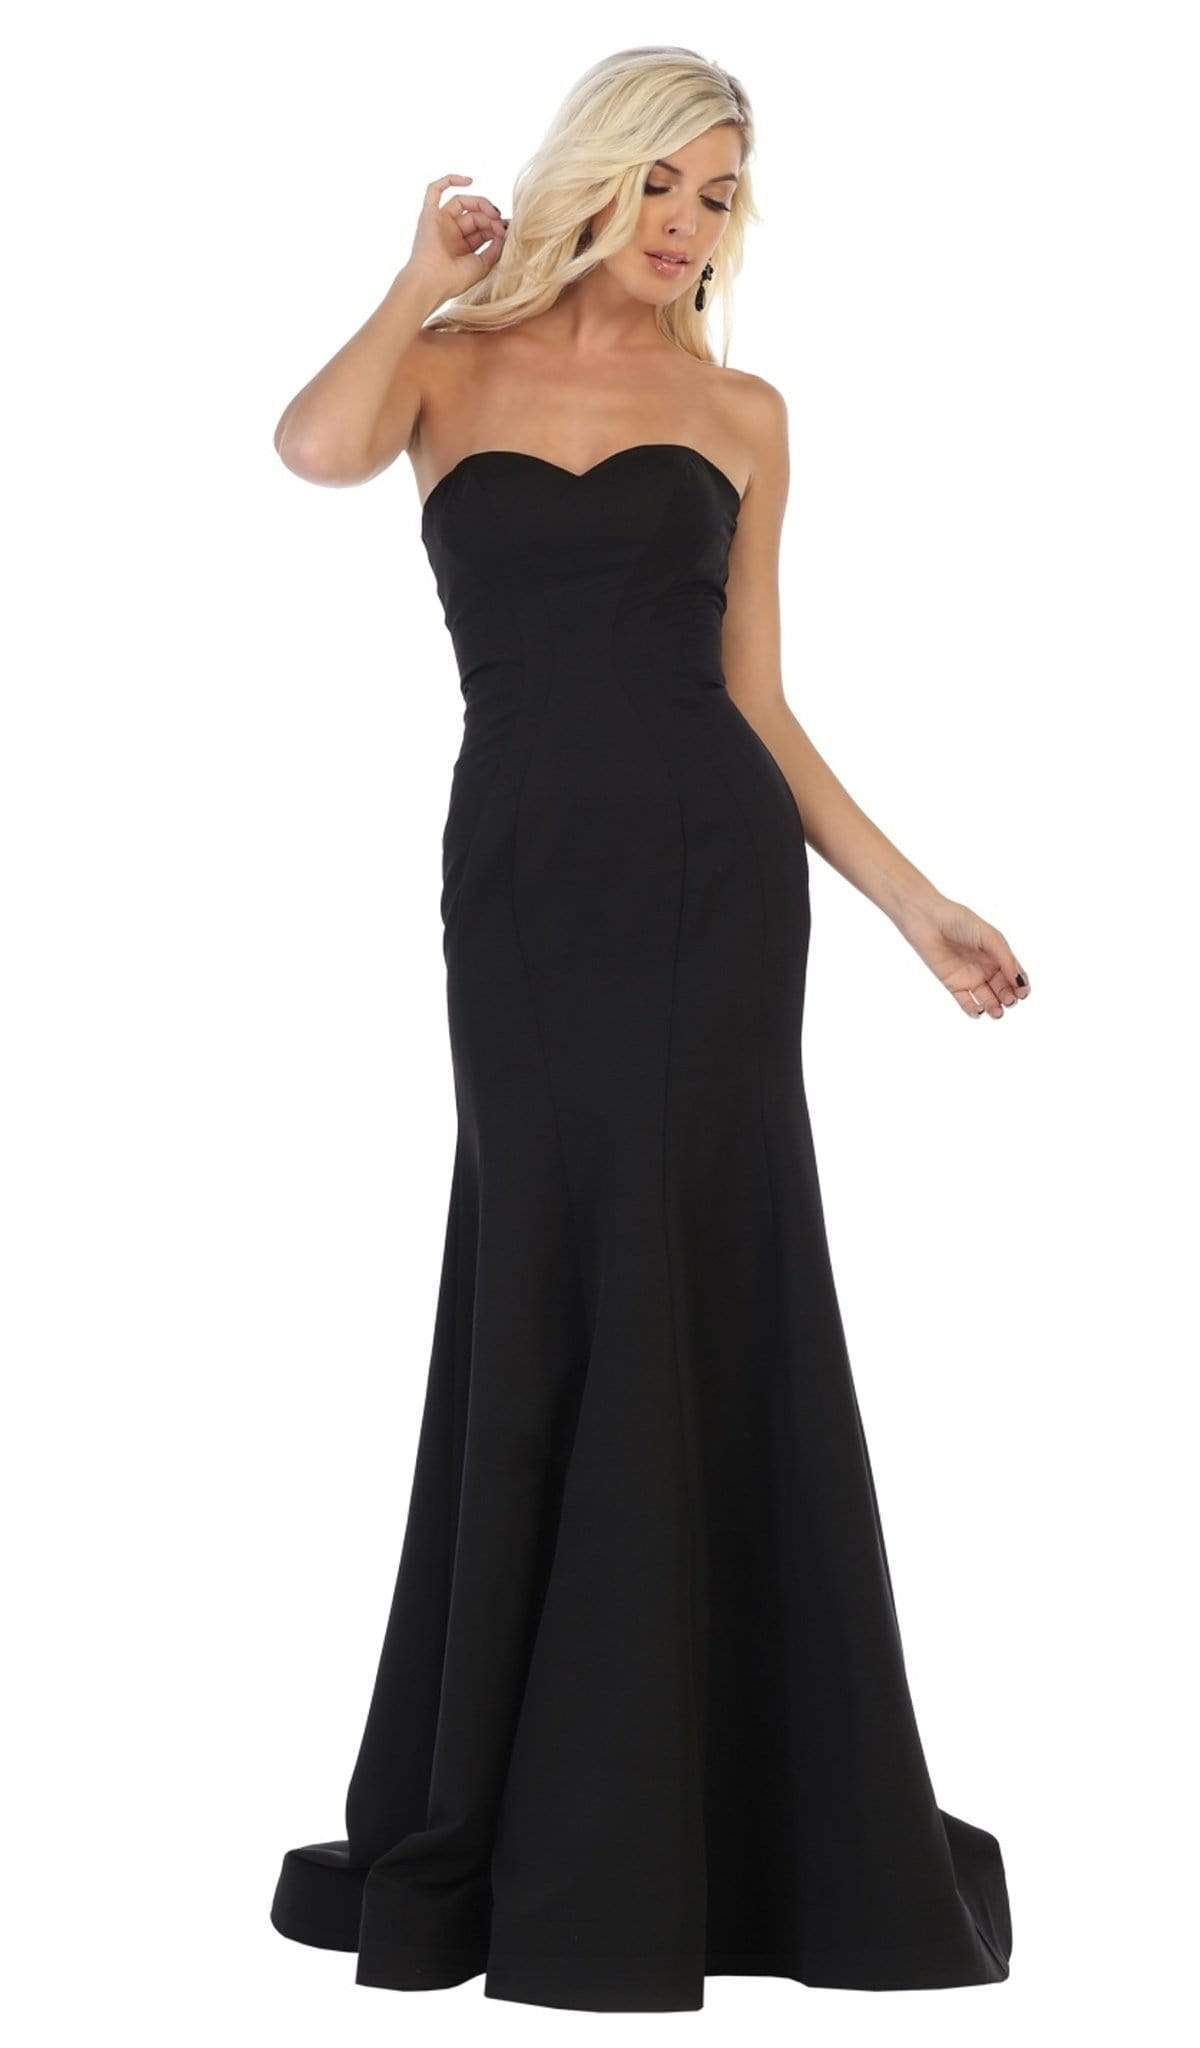 May Queen - RQ7703 Strapless Sweetheart Trumpet Evening Dress Bridesmaid Dresses 4 / Black